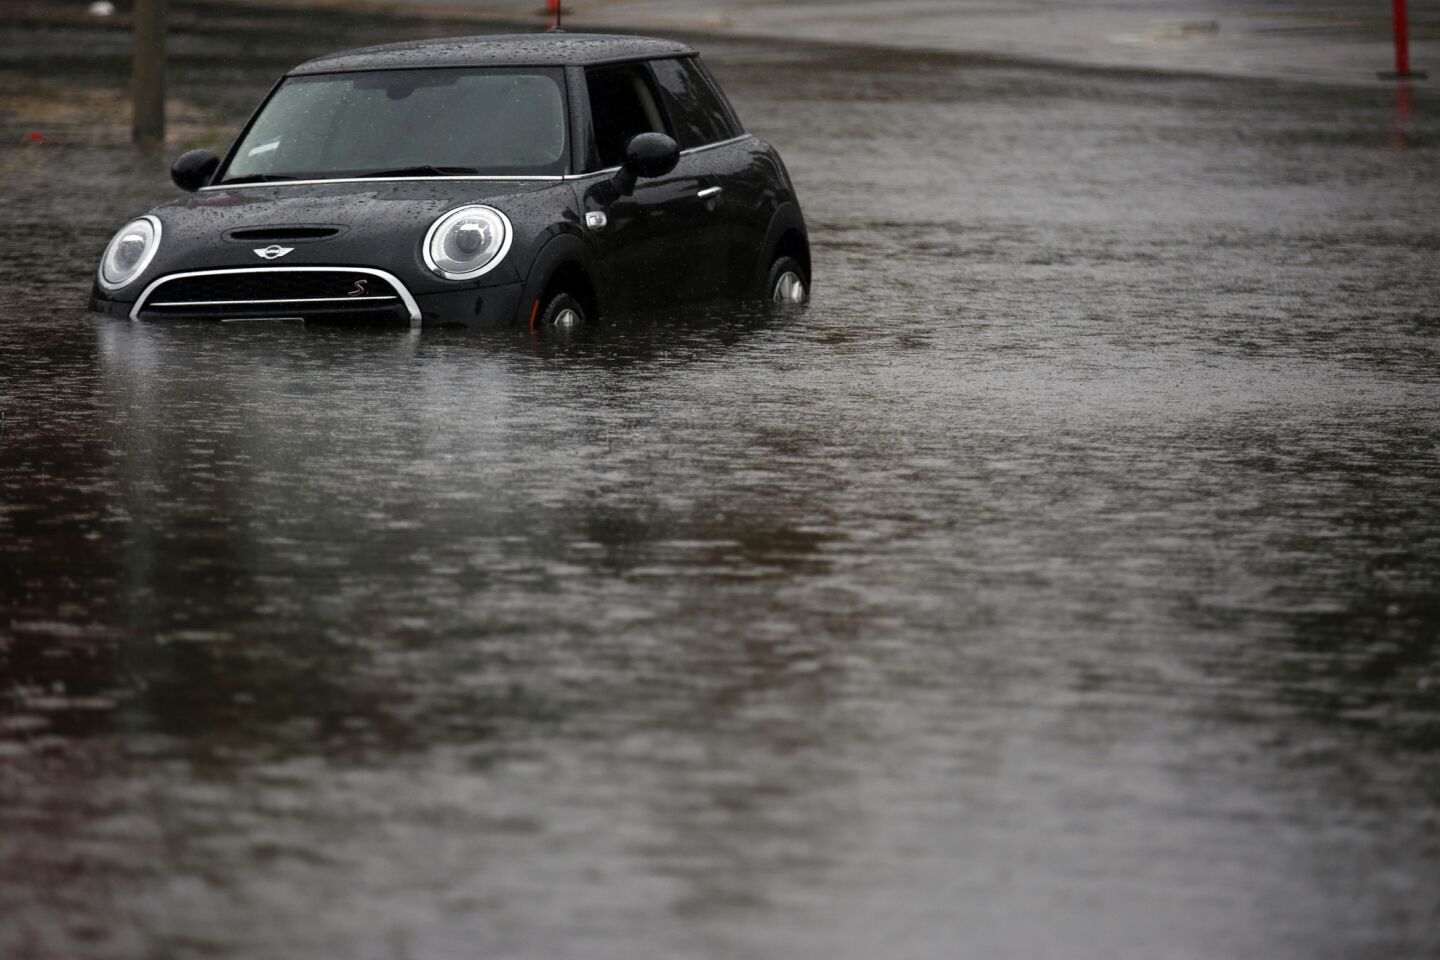 A black Mini Cooper is stranded in high standing water on Burbank Blvd near Balboa Golf Course in Encino.